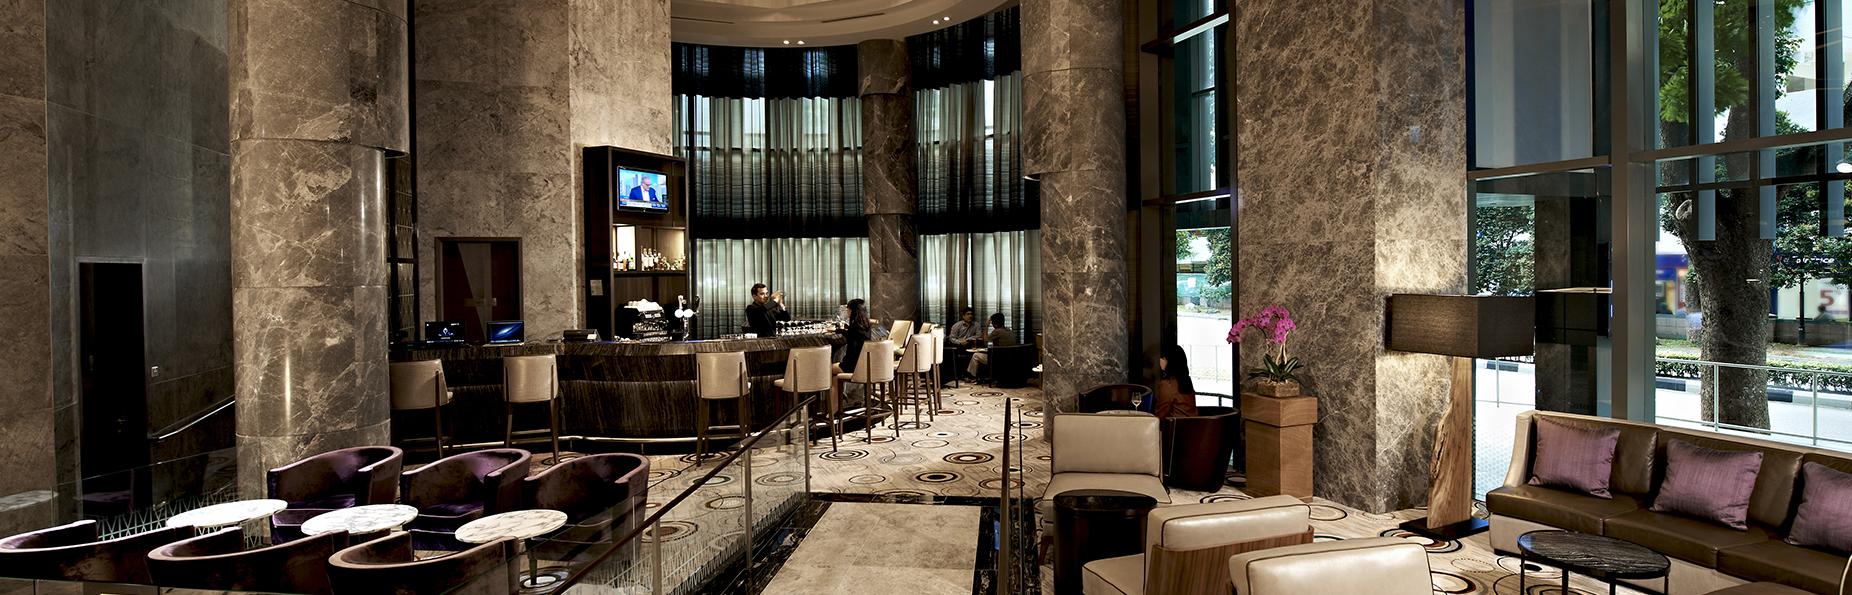 hotel lounge and bar